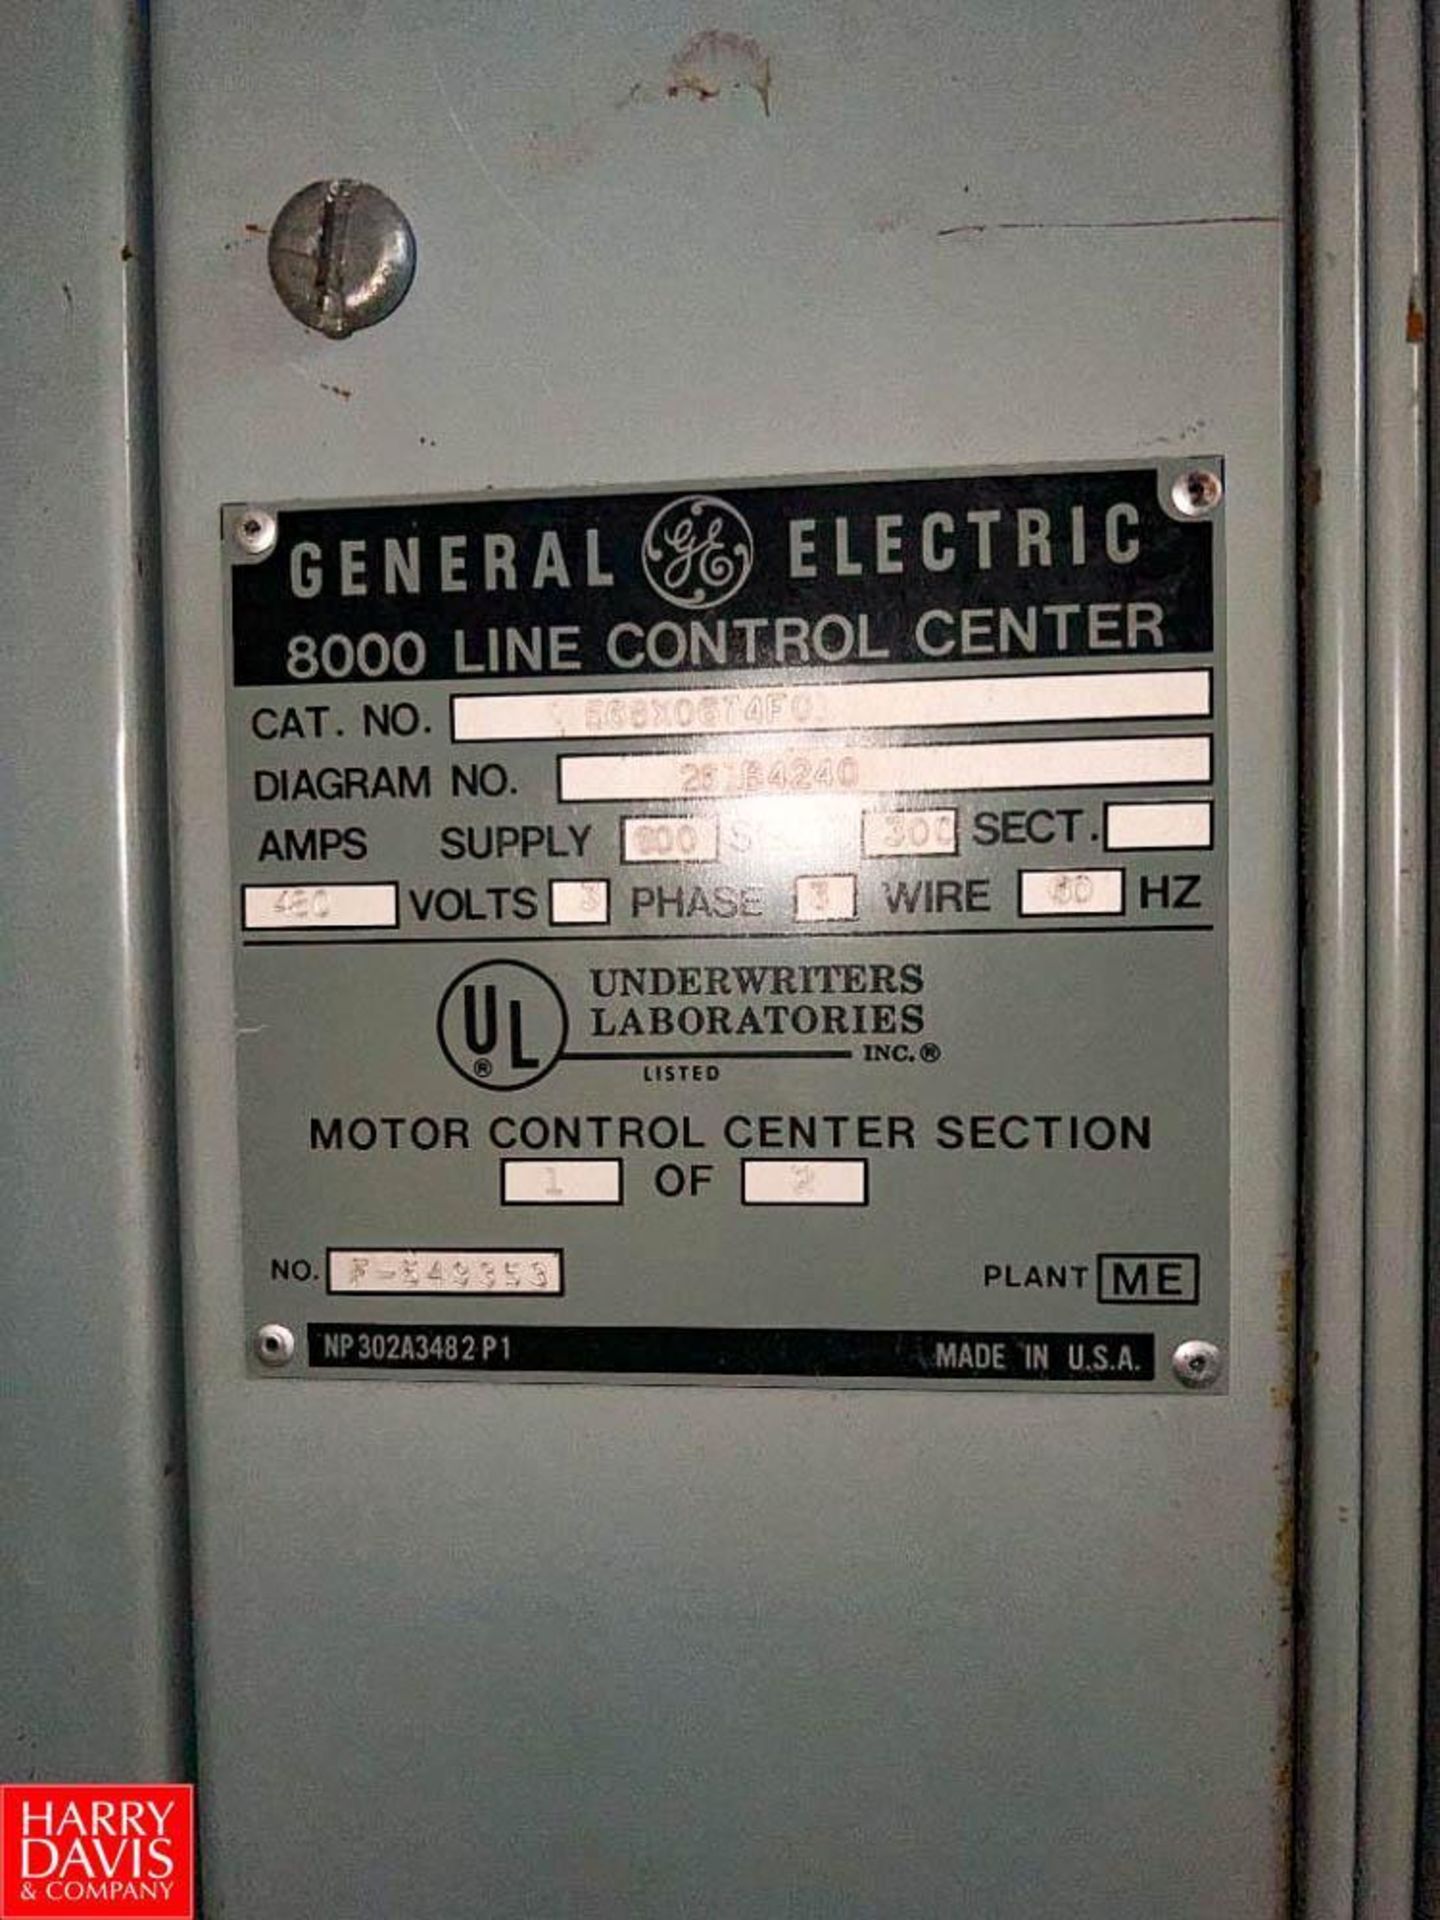 General Electric 8000 Line Control Center with (27) Disconnects, 600 Supply Amps and 300 Section Amp - Image 5 of 6